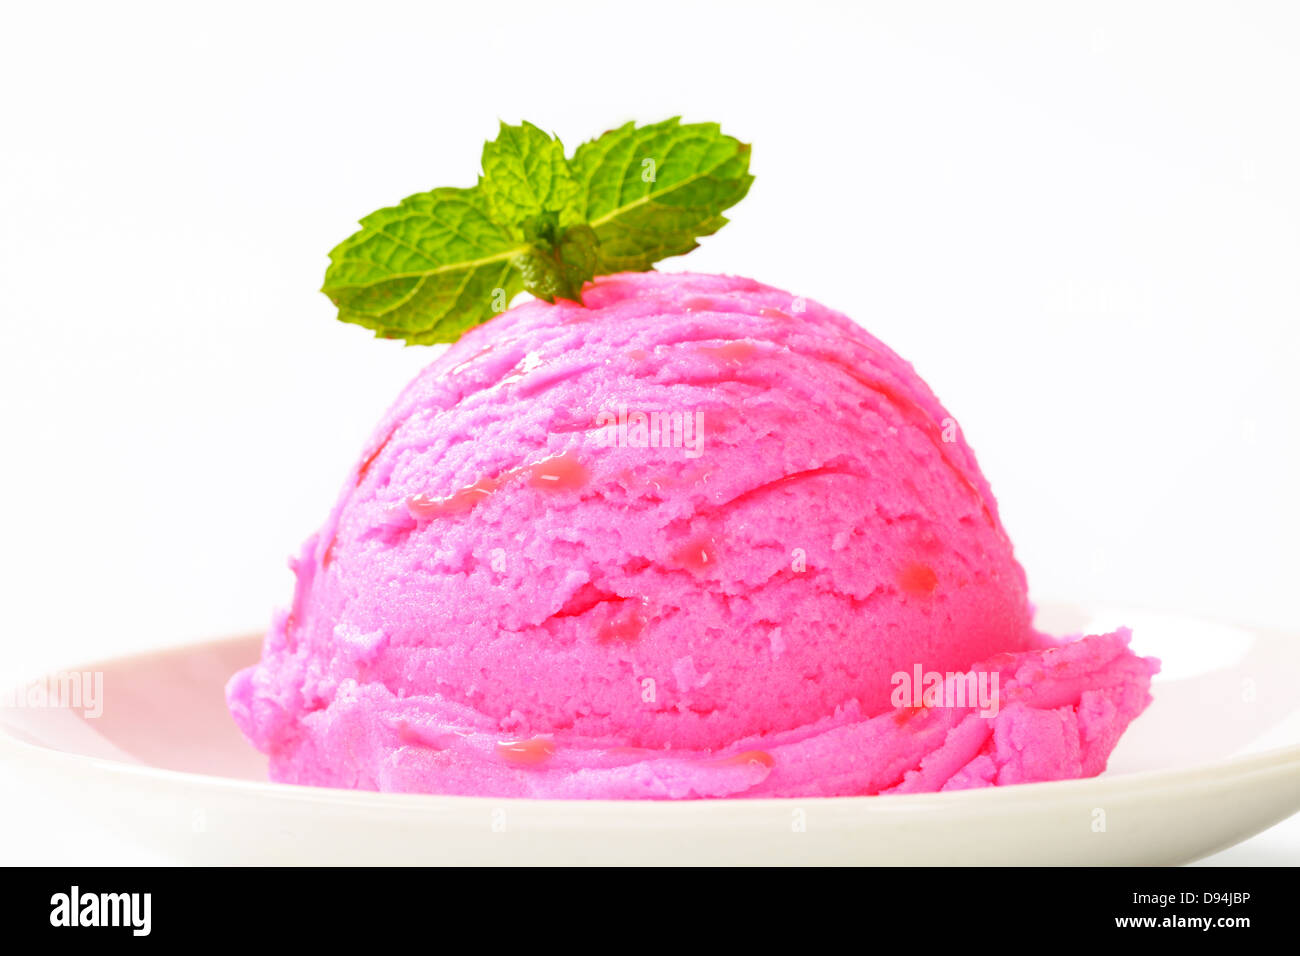 Scoop of pink ice cream on a dessert plate Stock Photo